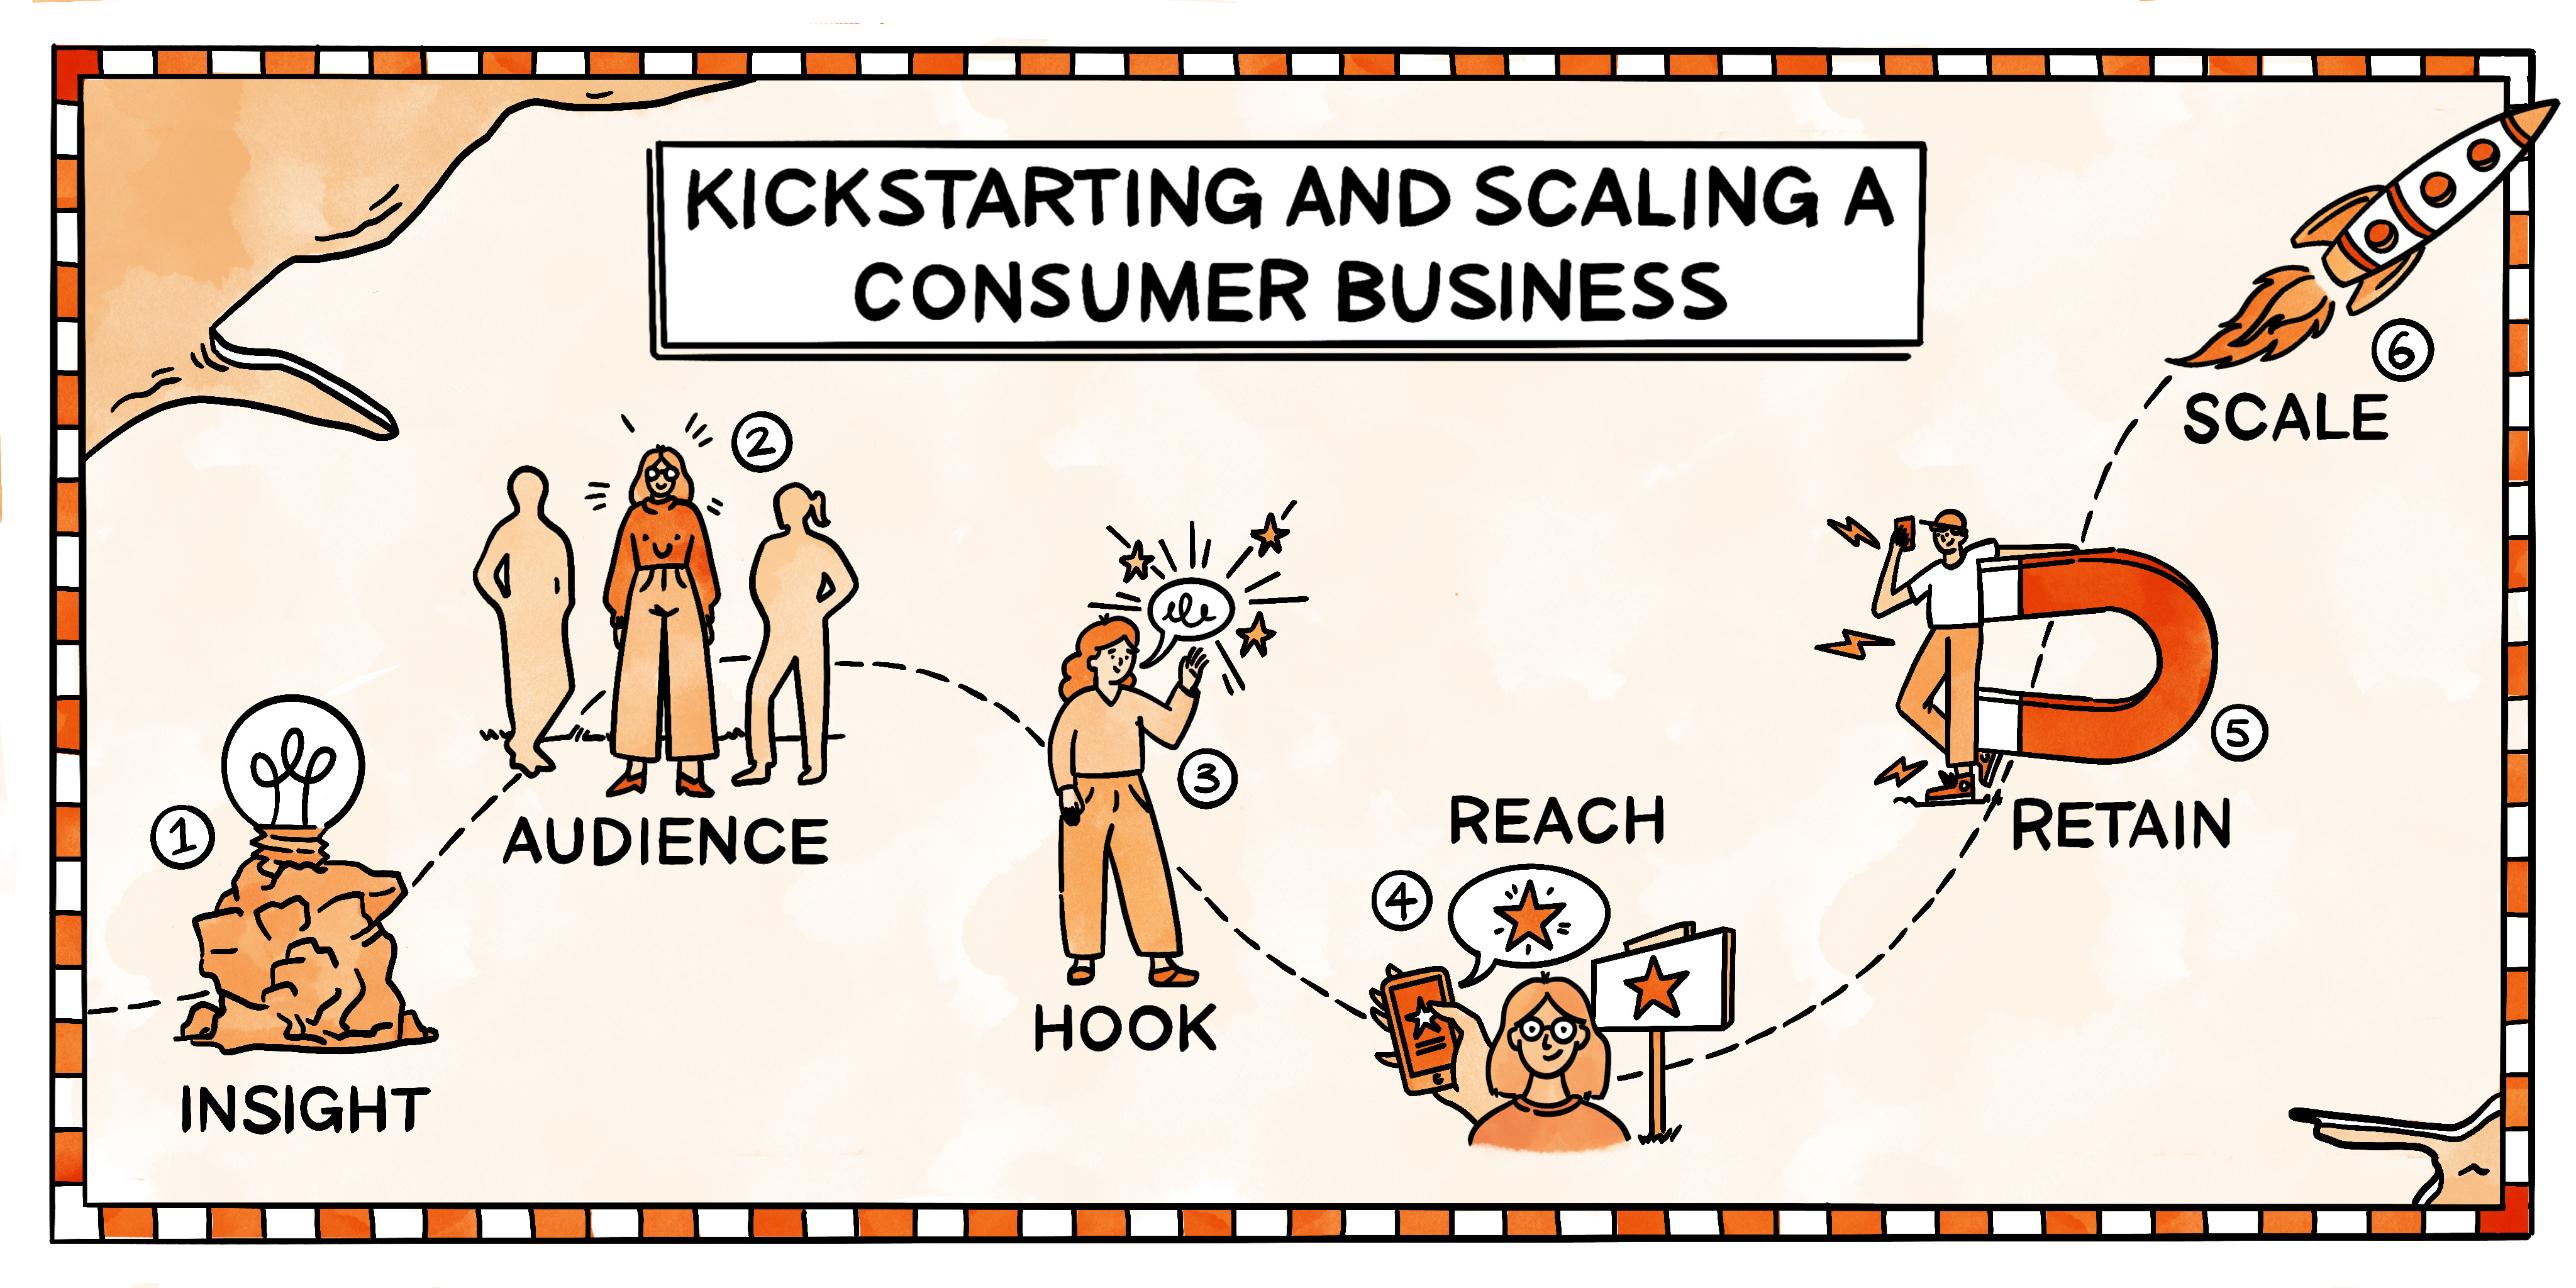 How to kickstart and scale a consumer business